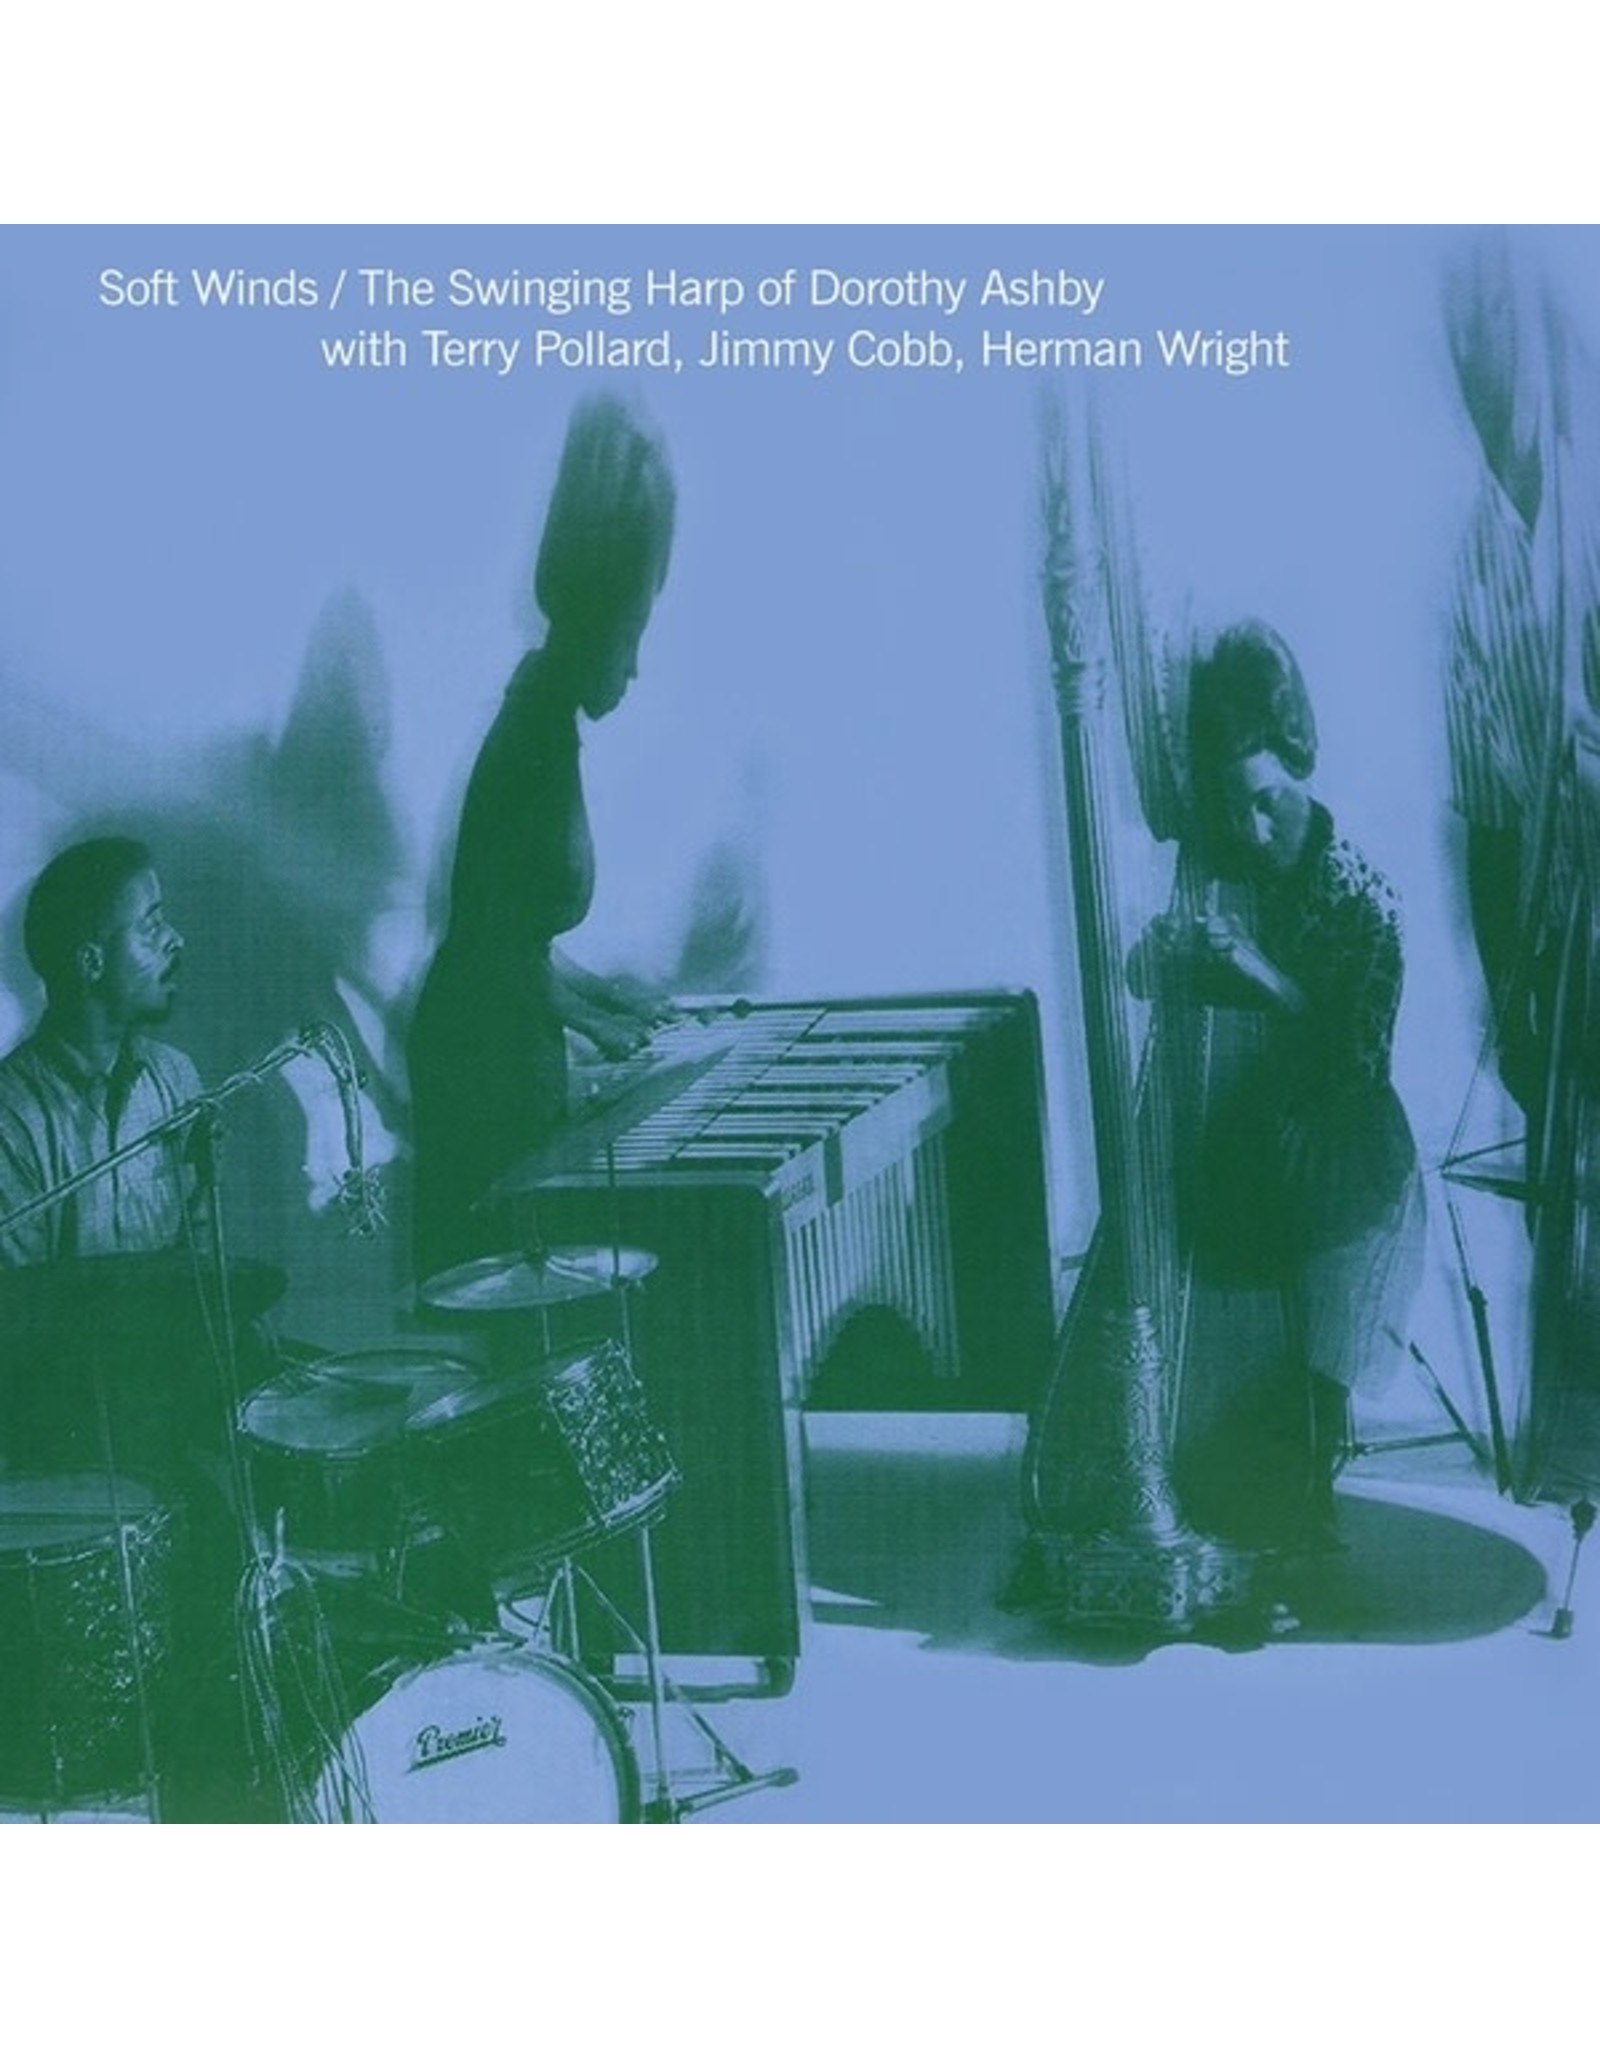 Sowing Ashby, Dorothy: Soft Winds: The Swinging Harp of Dorothy Ashby (clear) LP